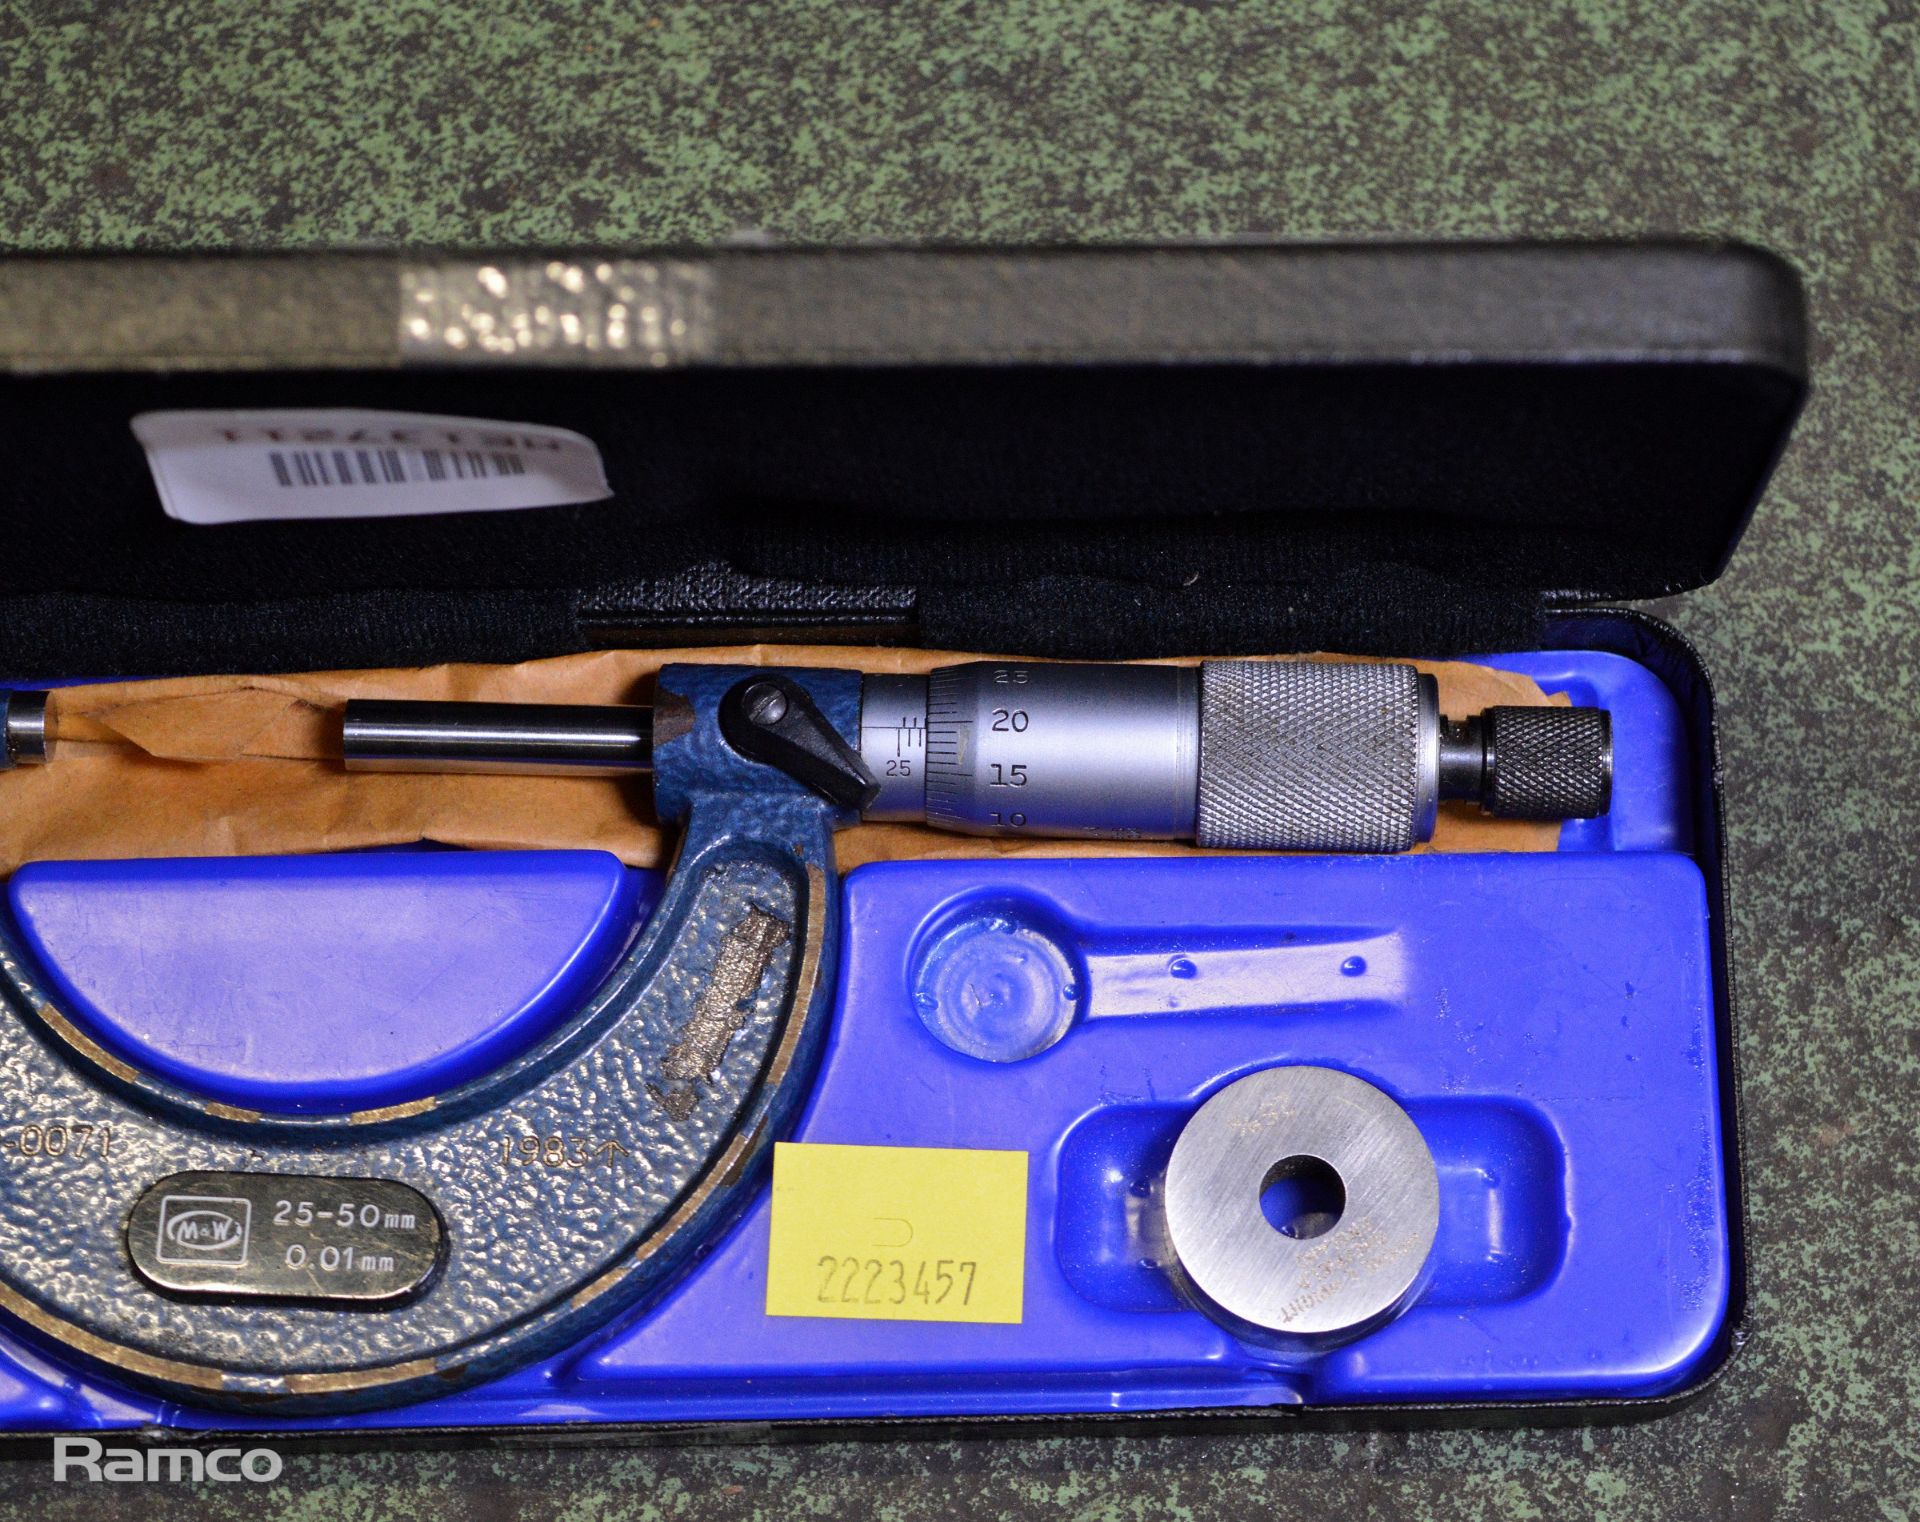 Moore & Wright Micrometer Caliper 25-50mm + Case - Image 3 of 4